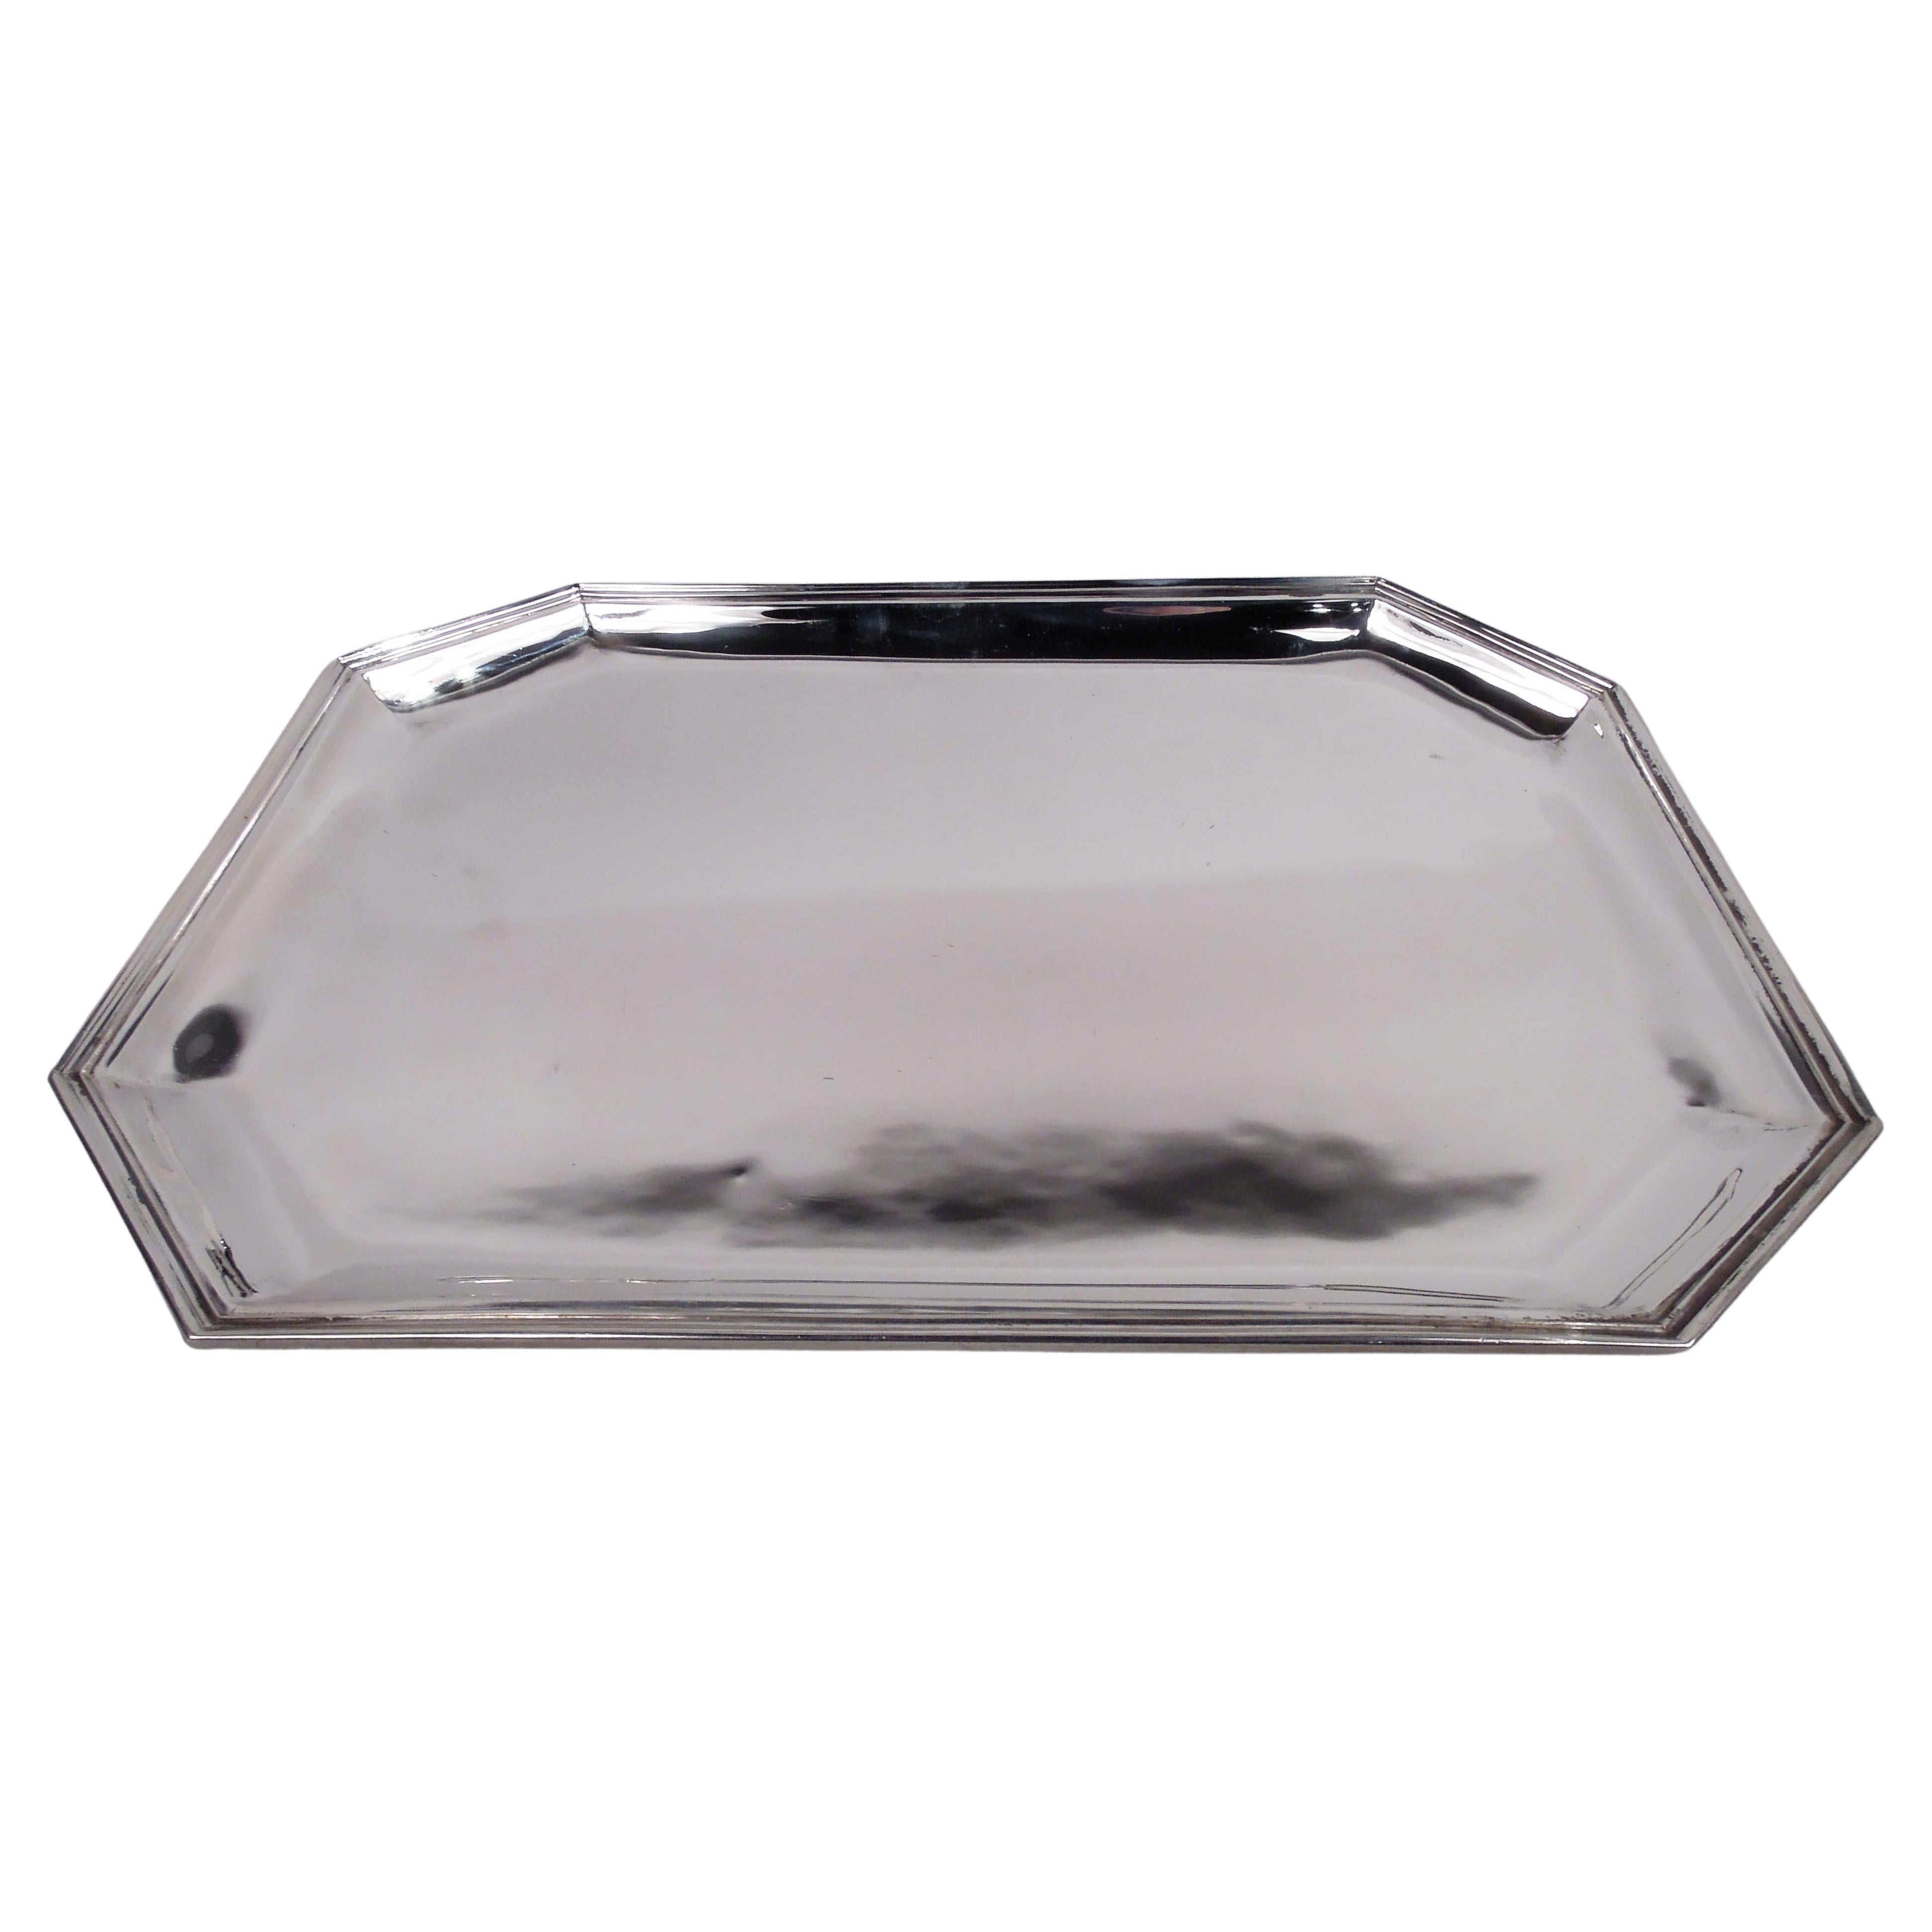 Cartier American Art Deco Sterling Silver Tray   For Sale